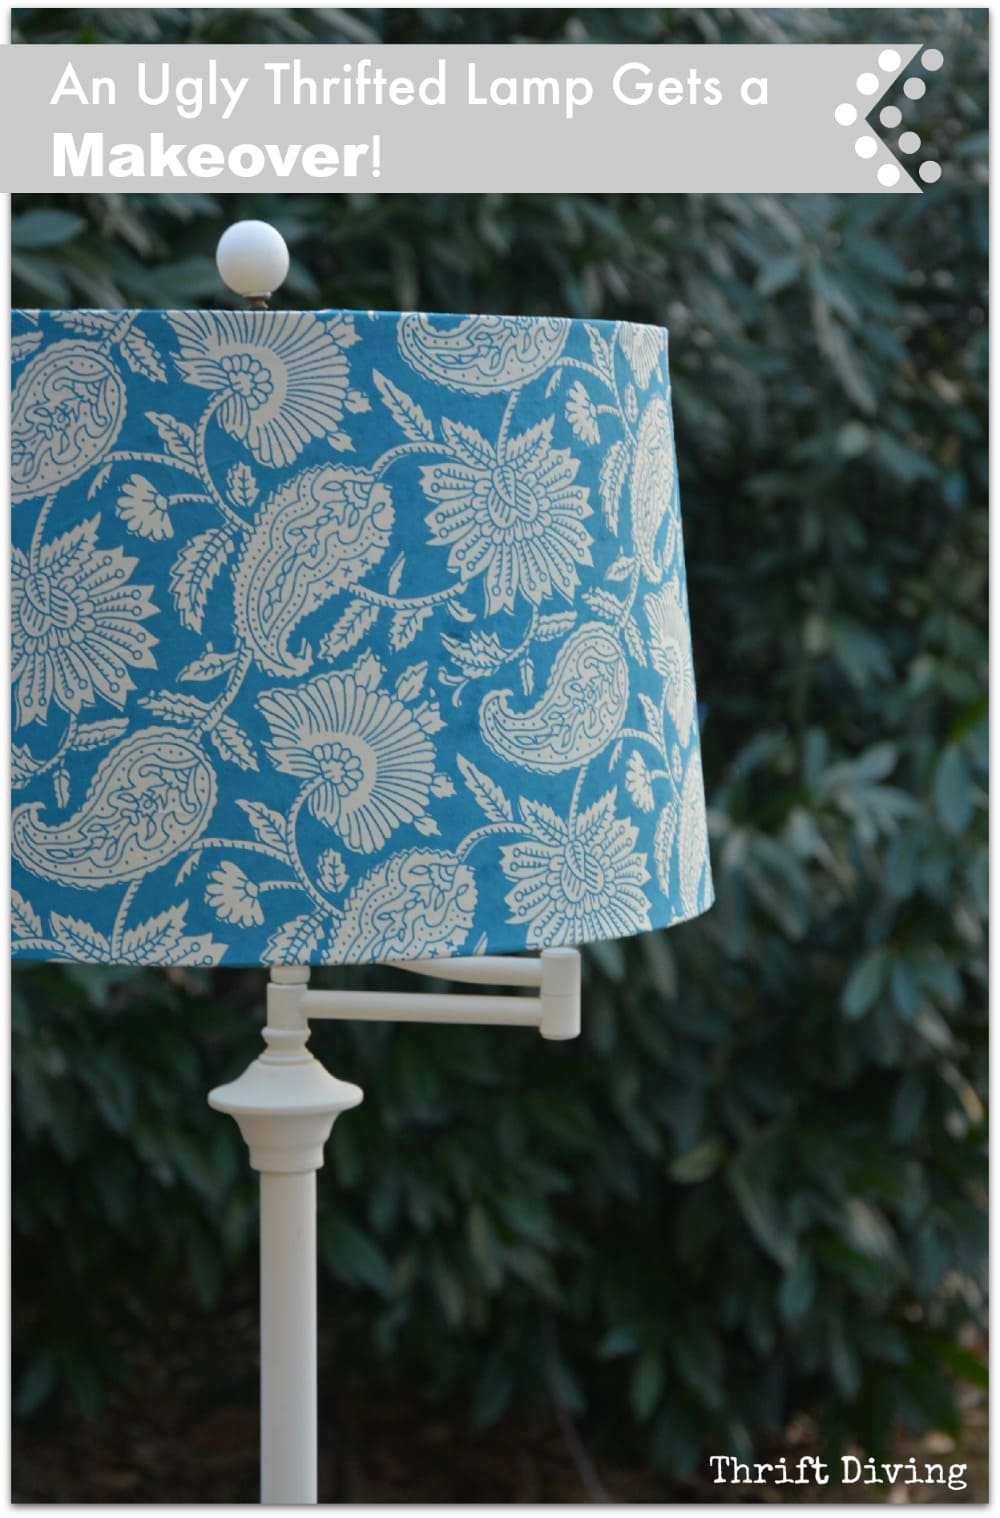 An Ugly Lamp From the Thrift Stores Gets a Makeover!